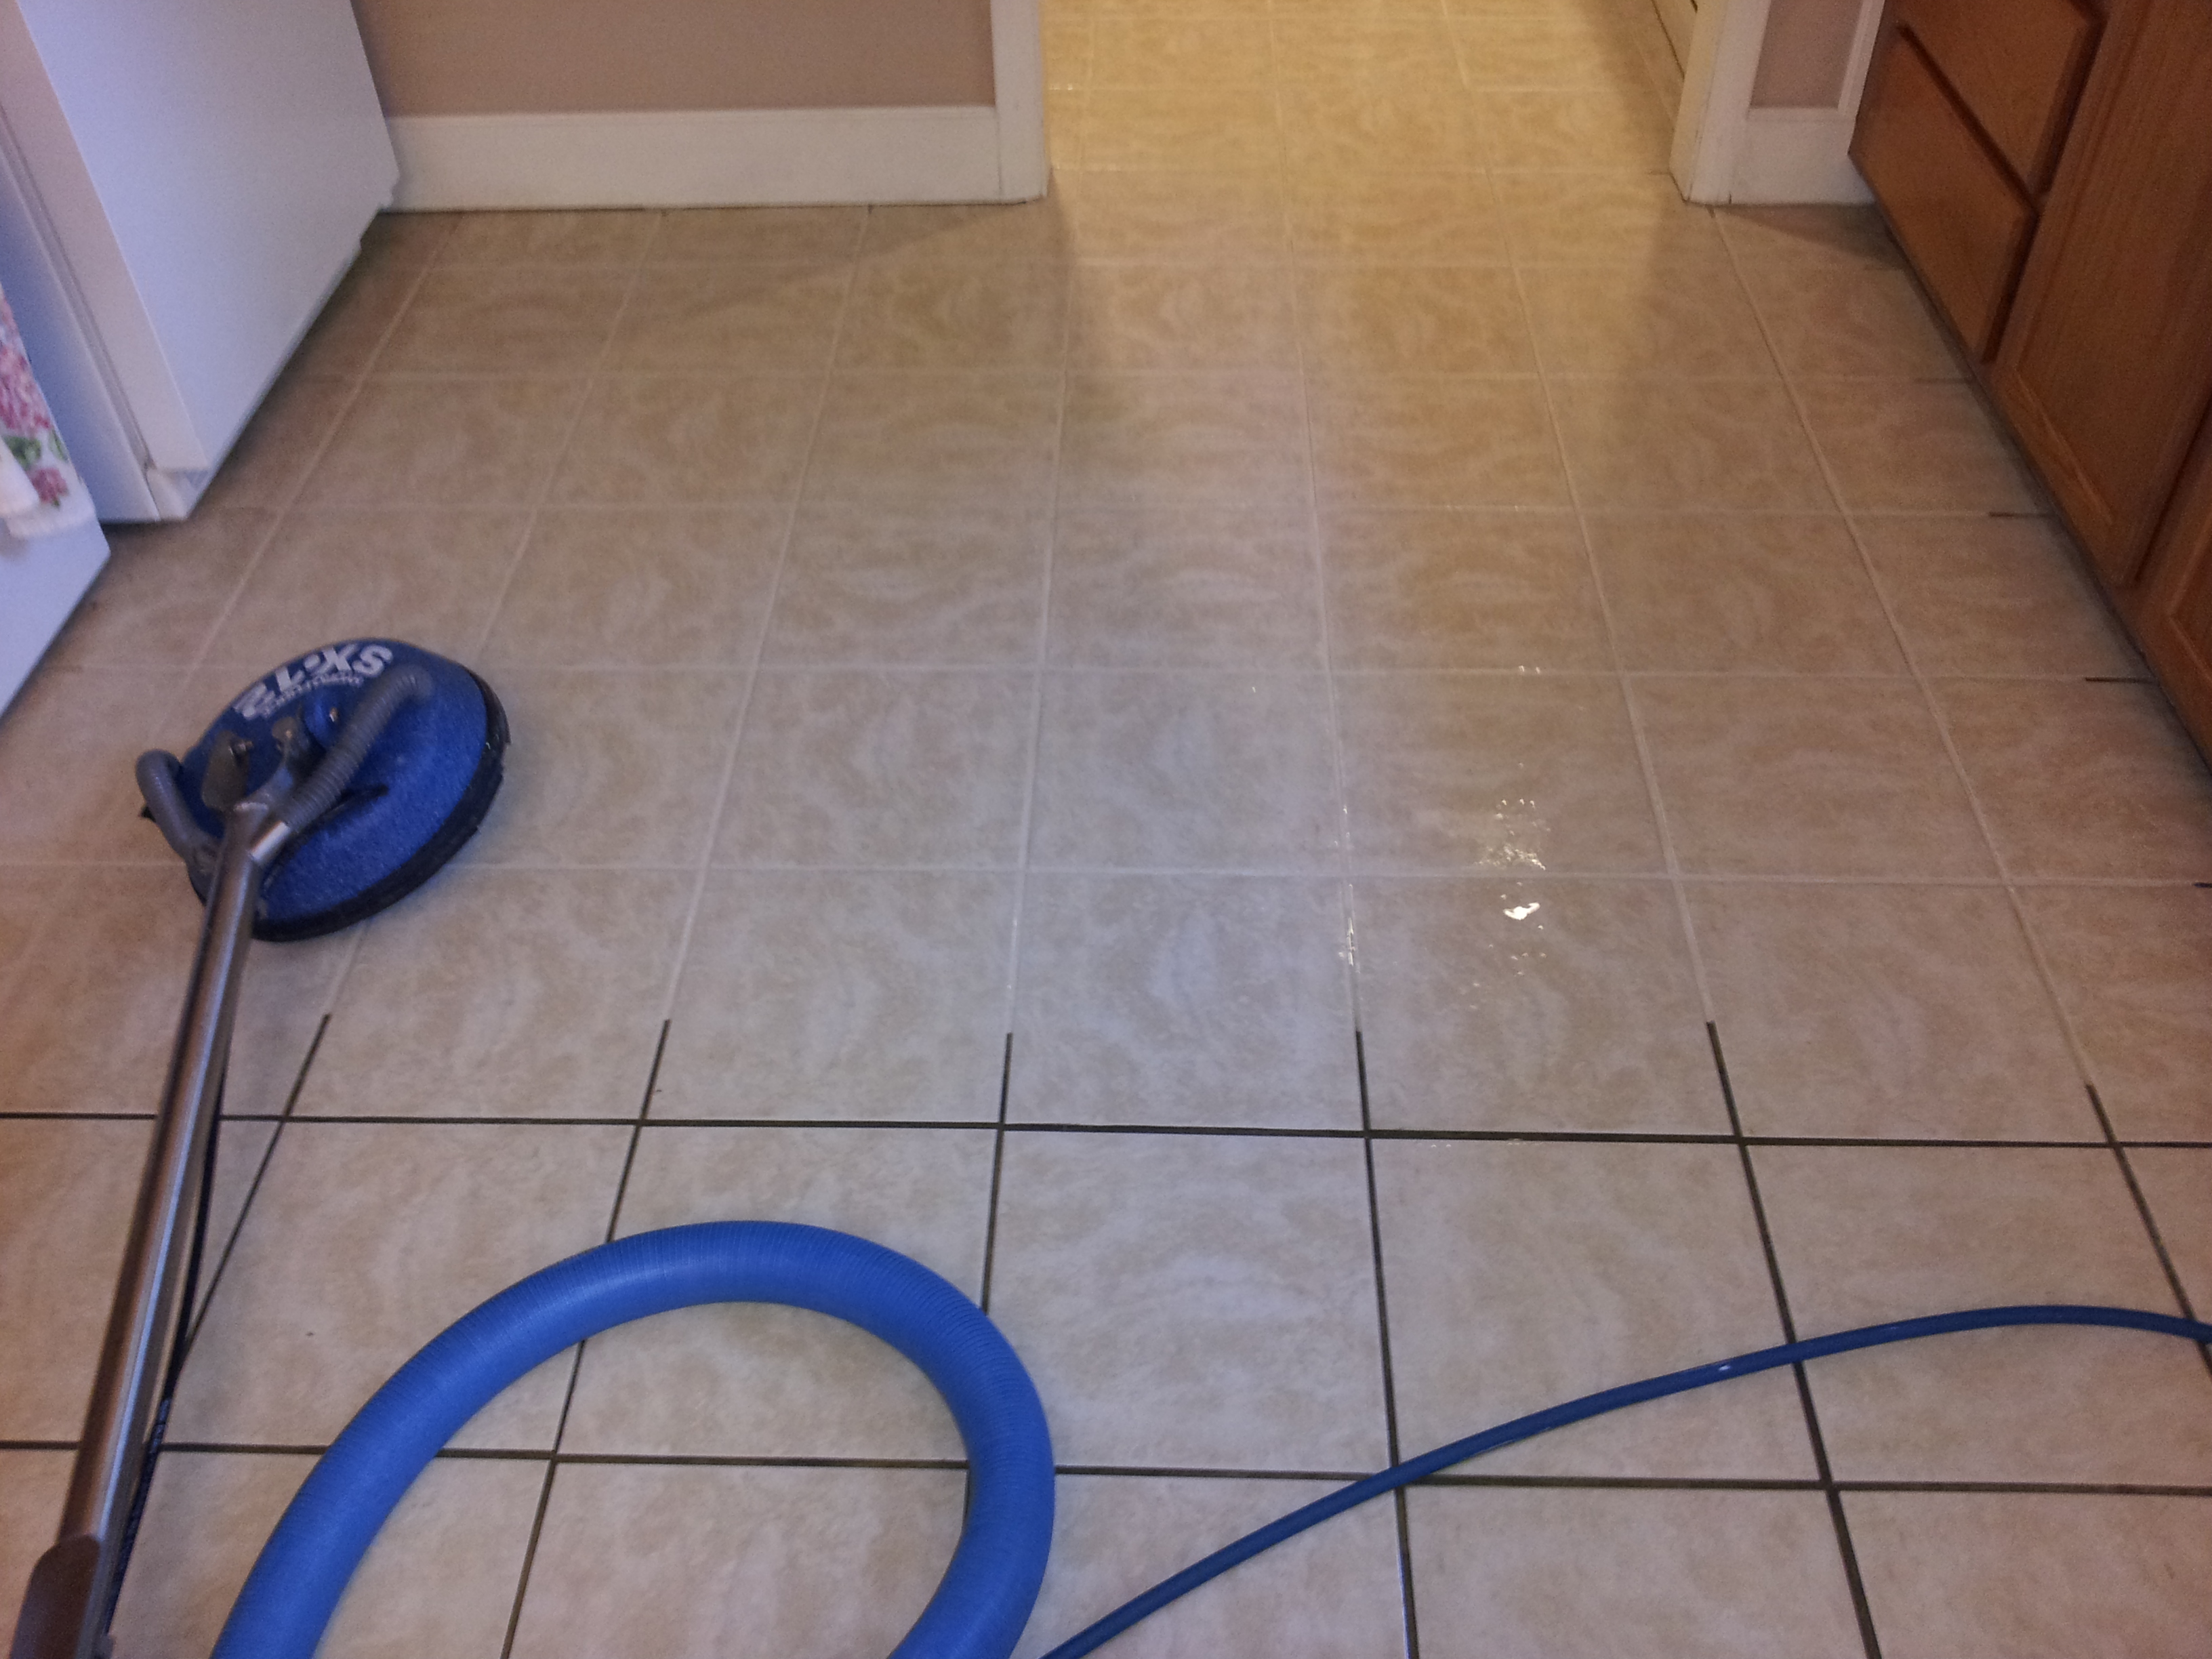 Ultimate Tile Grout Cleaning S, How To Best Clean Bathroom Tile Grout